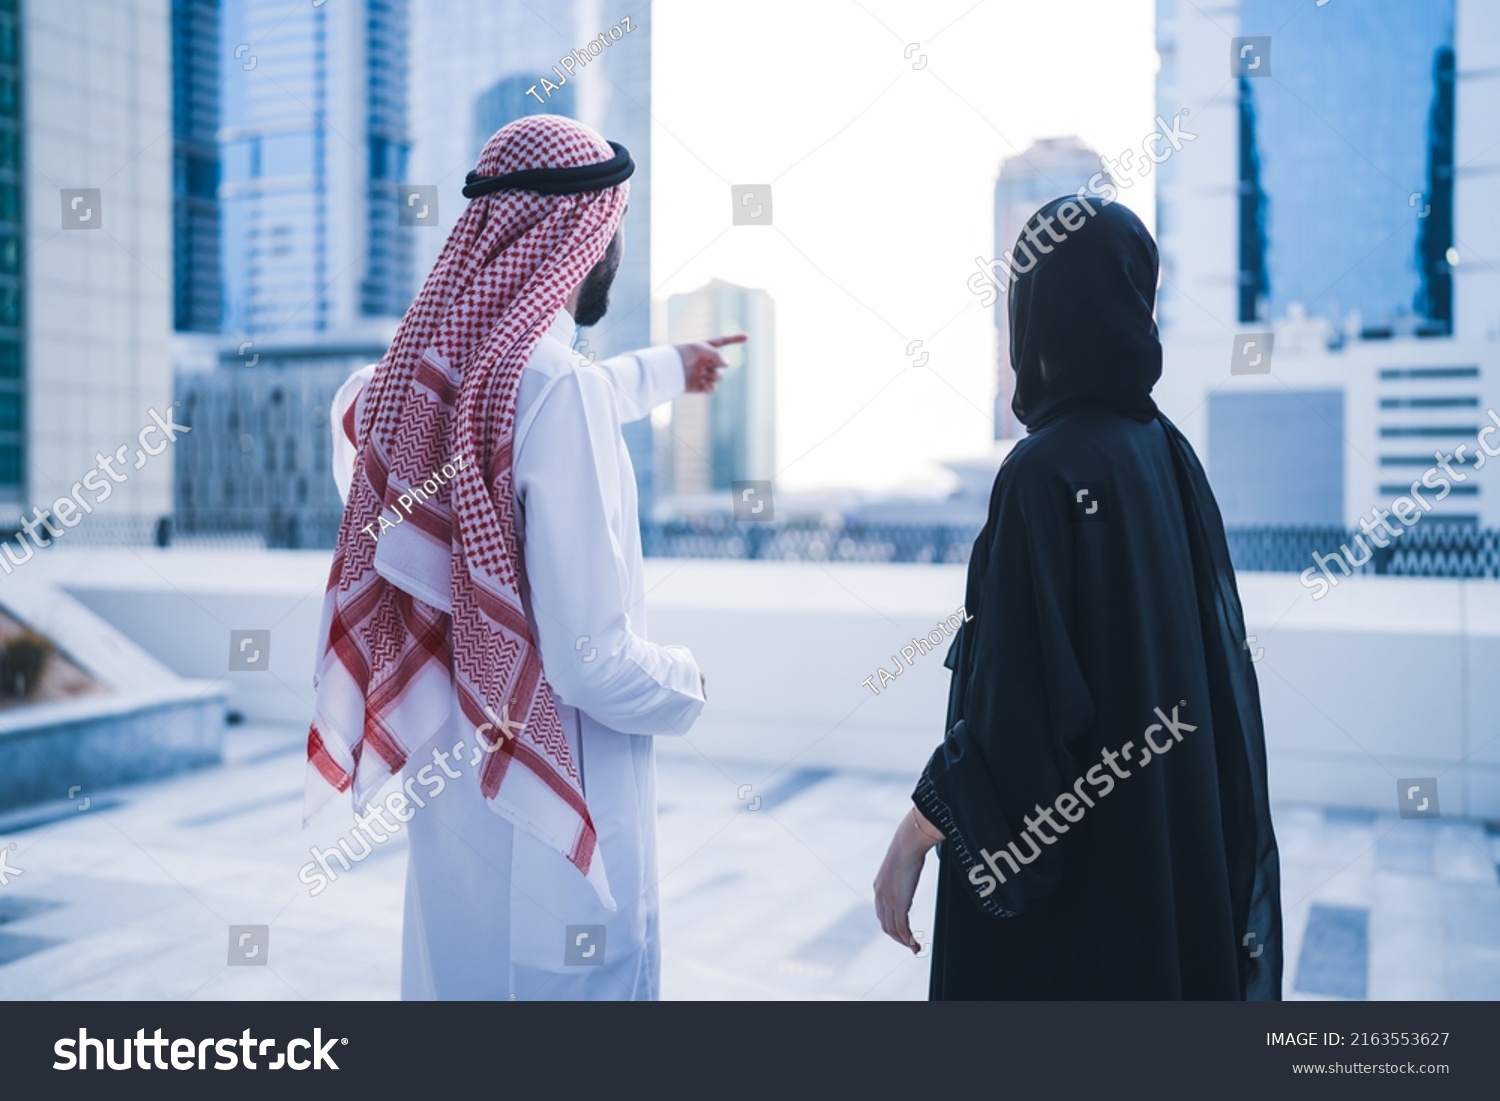 Back view of Arab family or business work colleagues pointing towards city skyline wearing traditional abaya and dress. Muslim Saudi or Emirati couple or team working together #2163553627